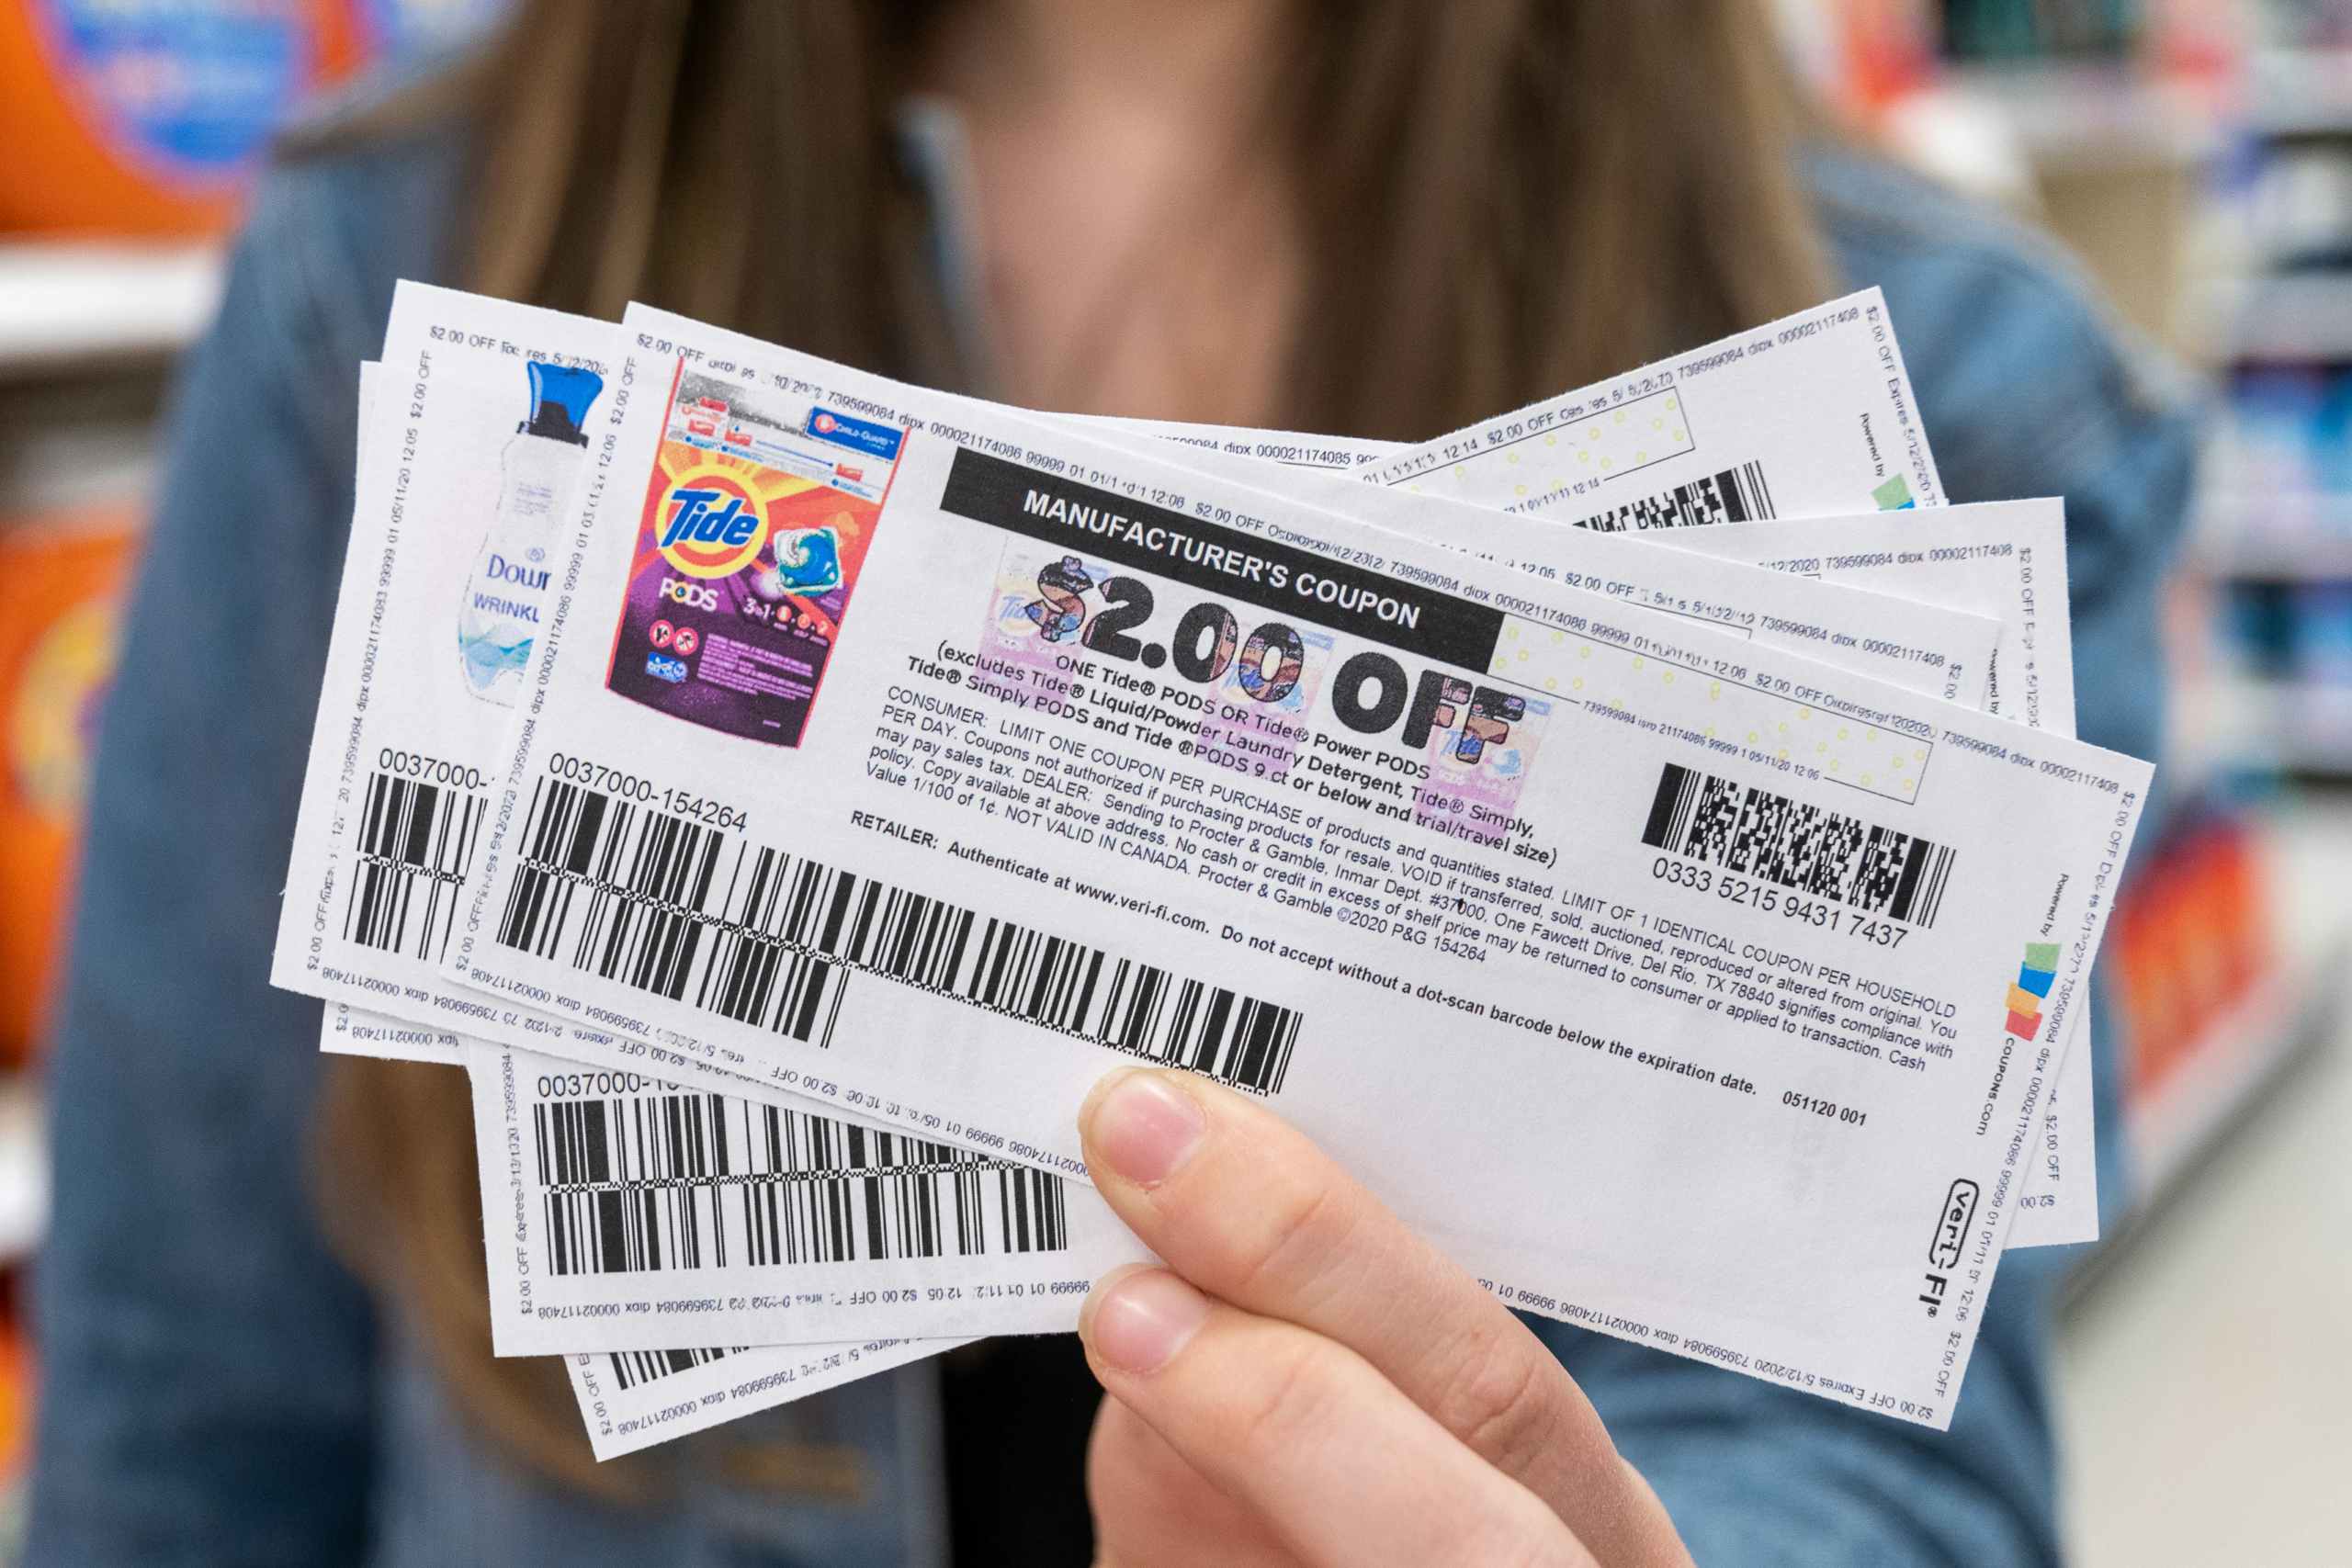 how-to-use-manufacturer-coupons-online-stacking-coupons-target-tide-pods-laundry-detergent-dates-removed-reupload